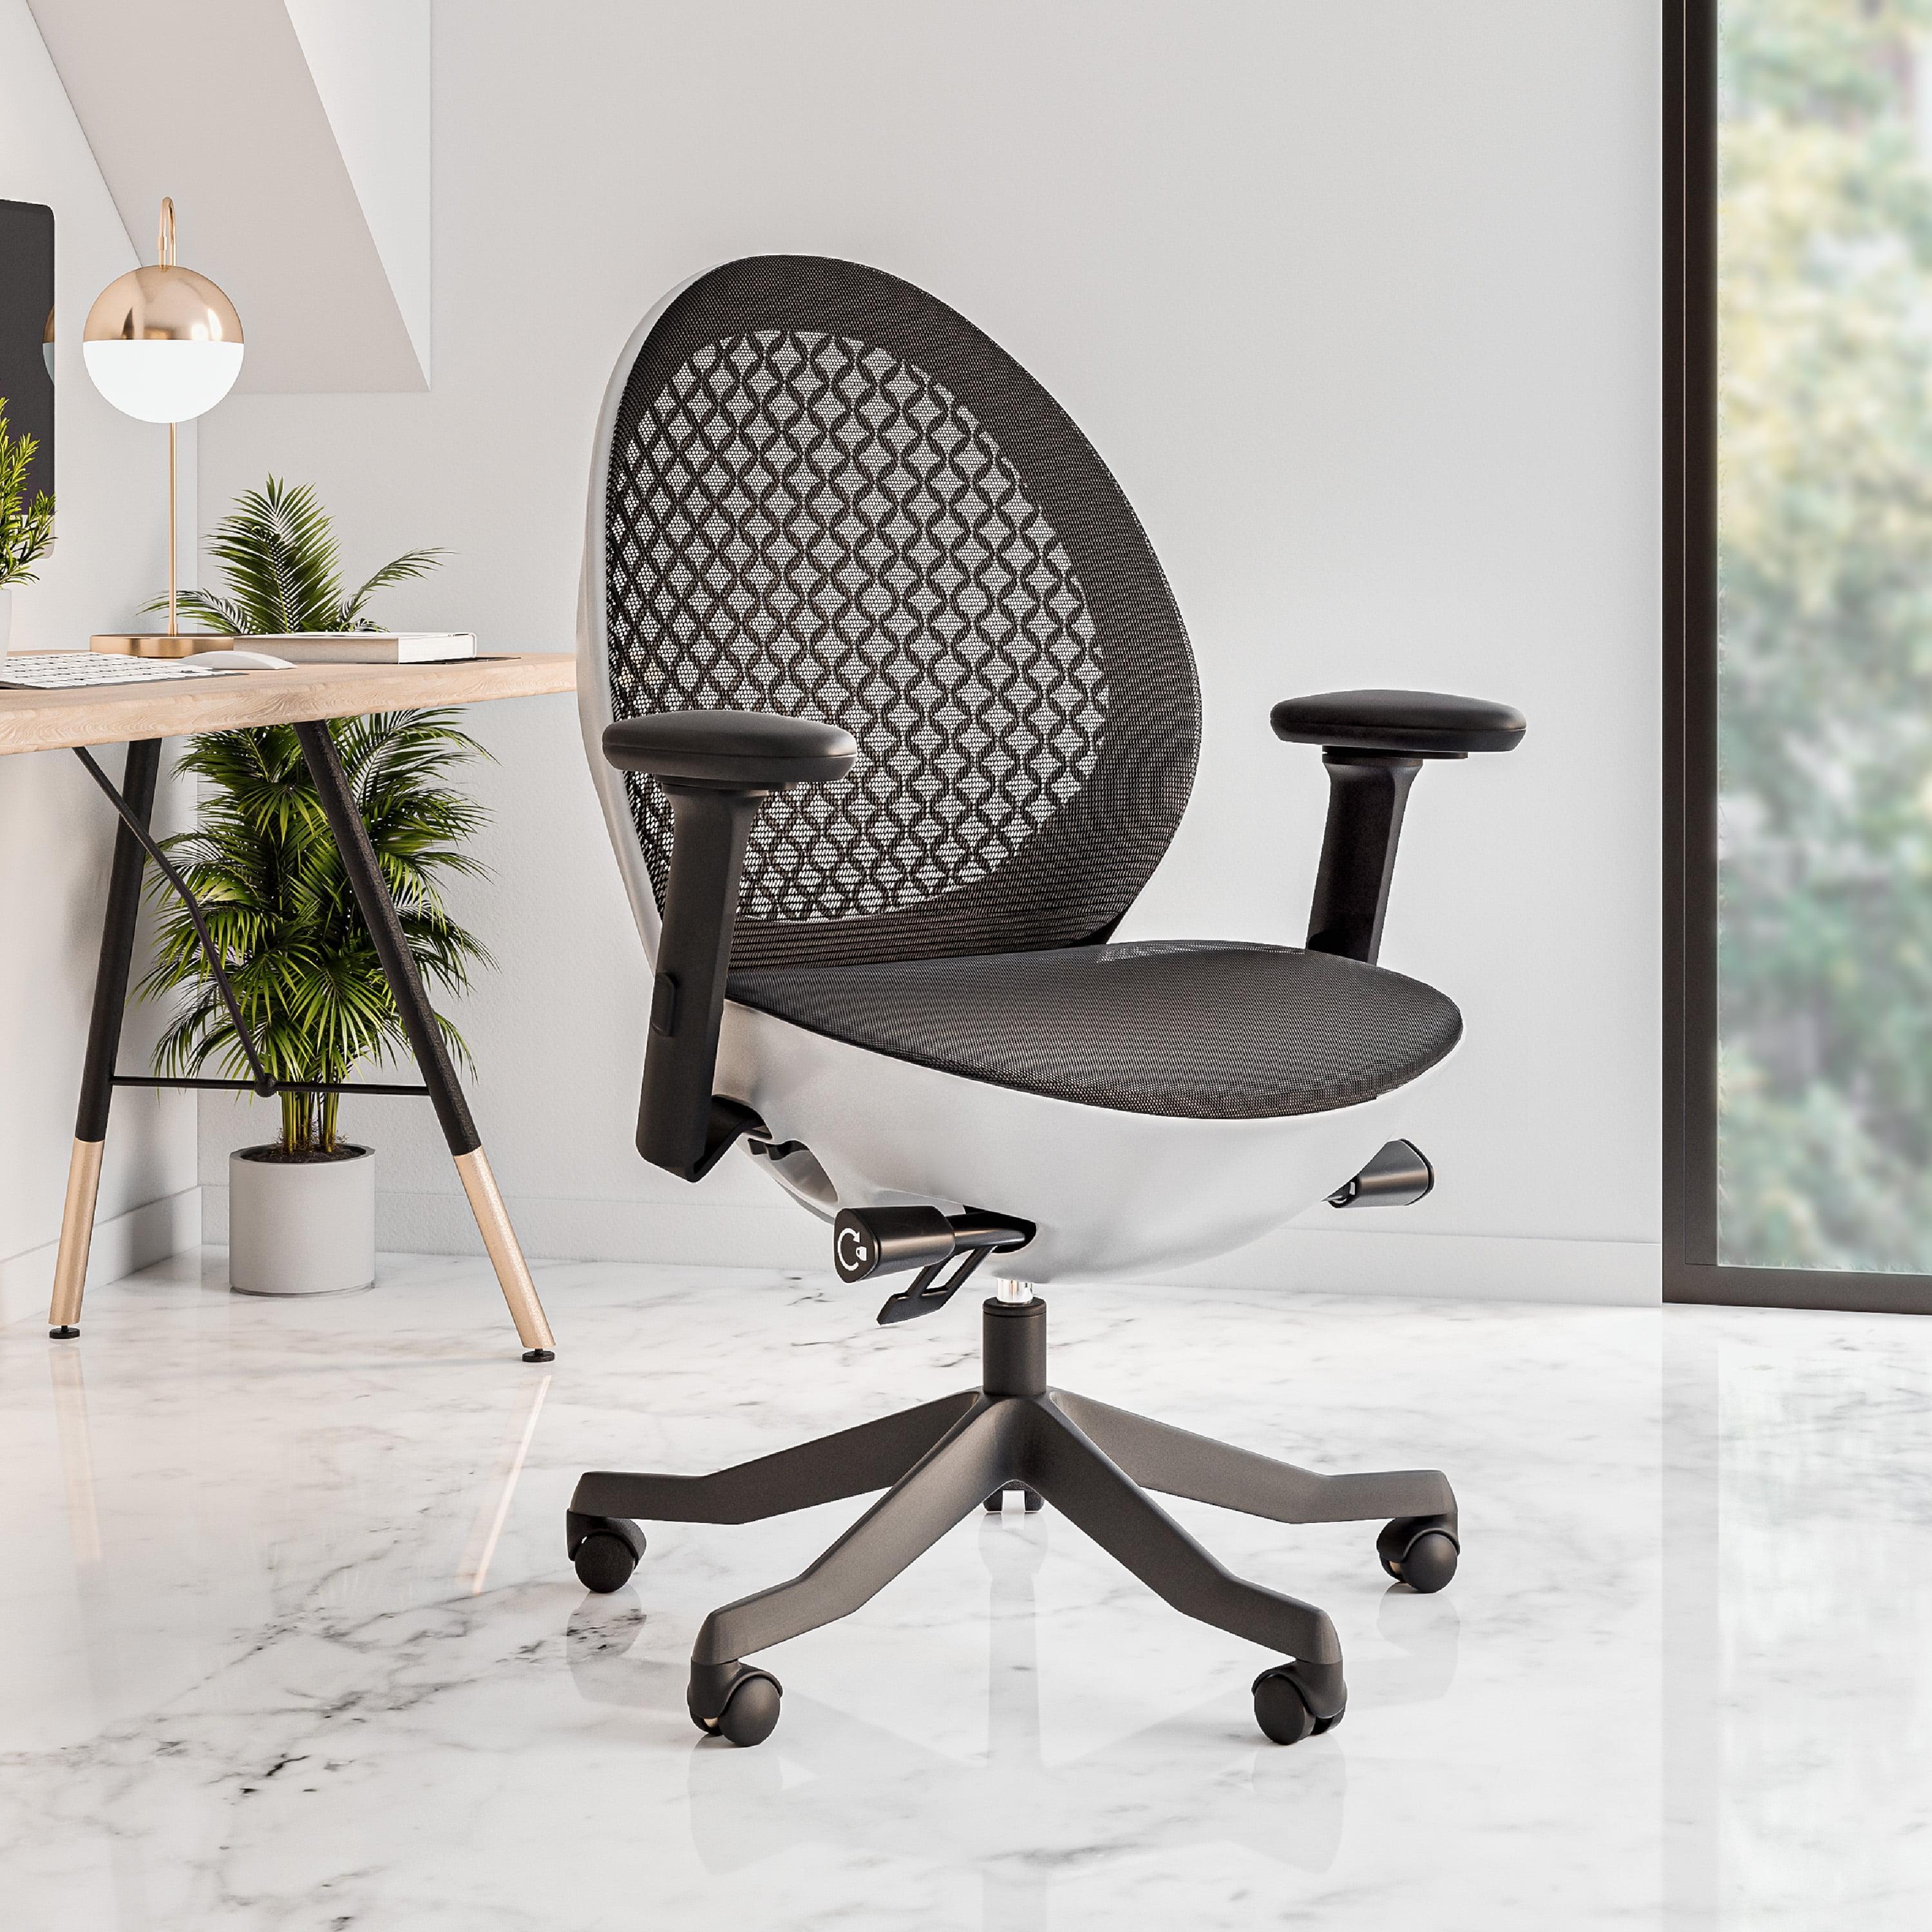 ErgoFlex White Mesh Executive Chair with Adjustable Arms